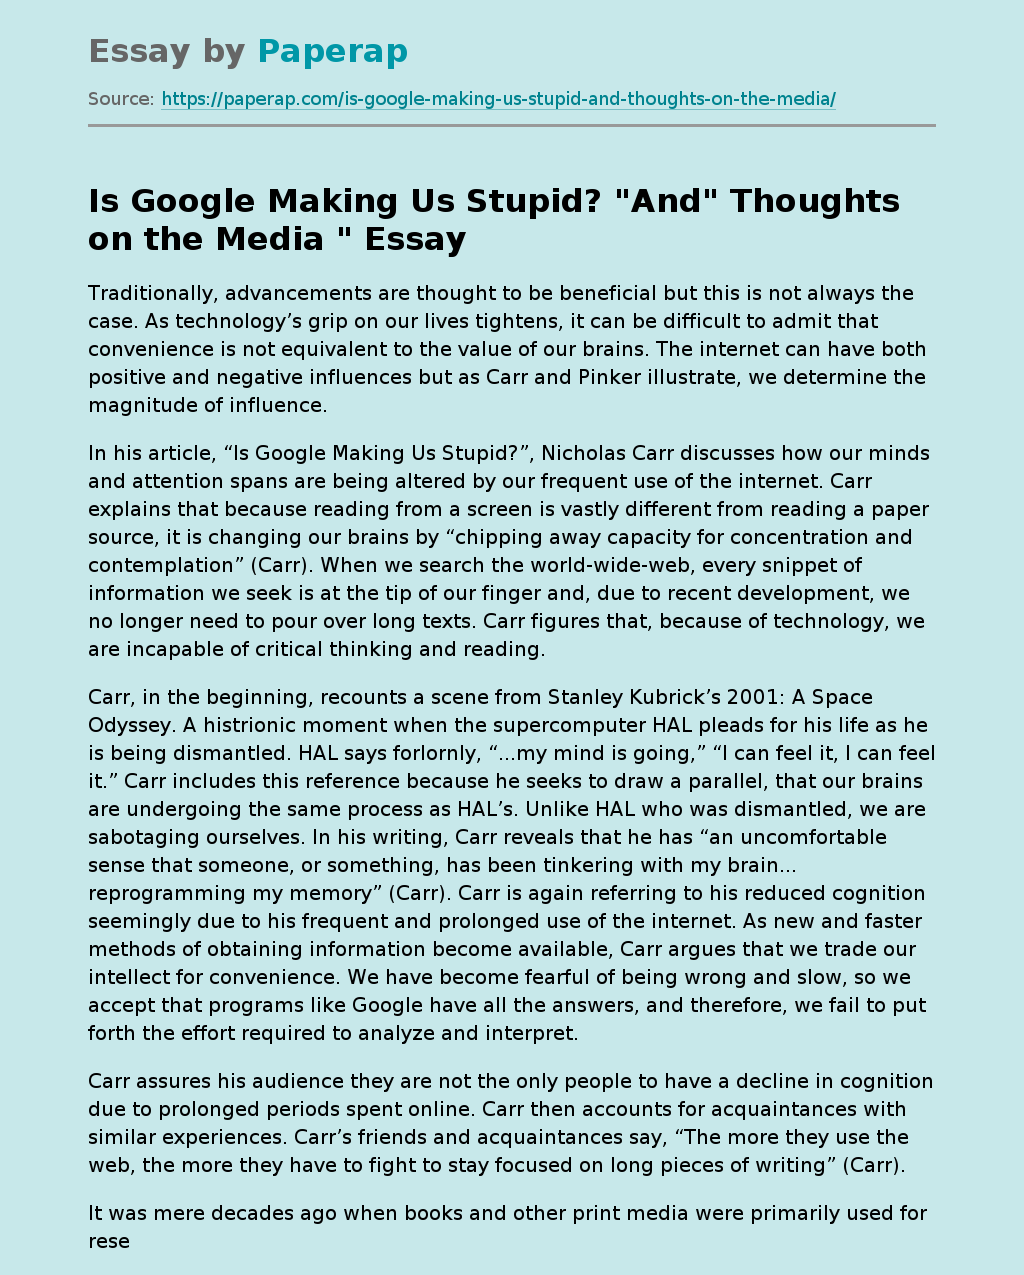 Is Google Making Us Stupid? "And" Thoughts on the Media "